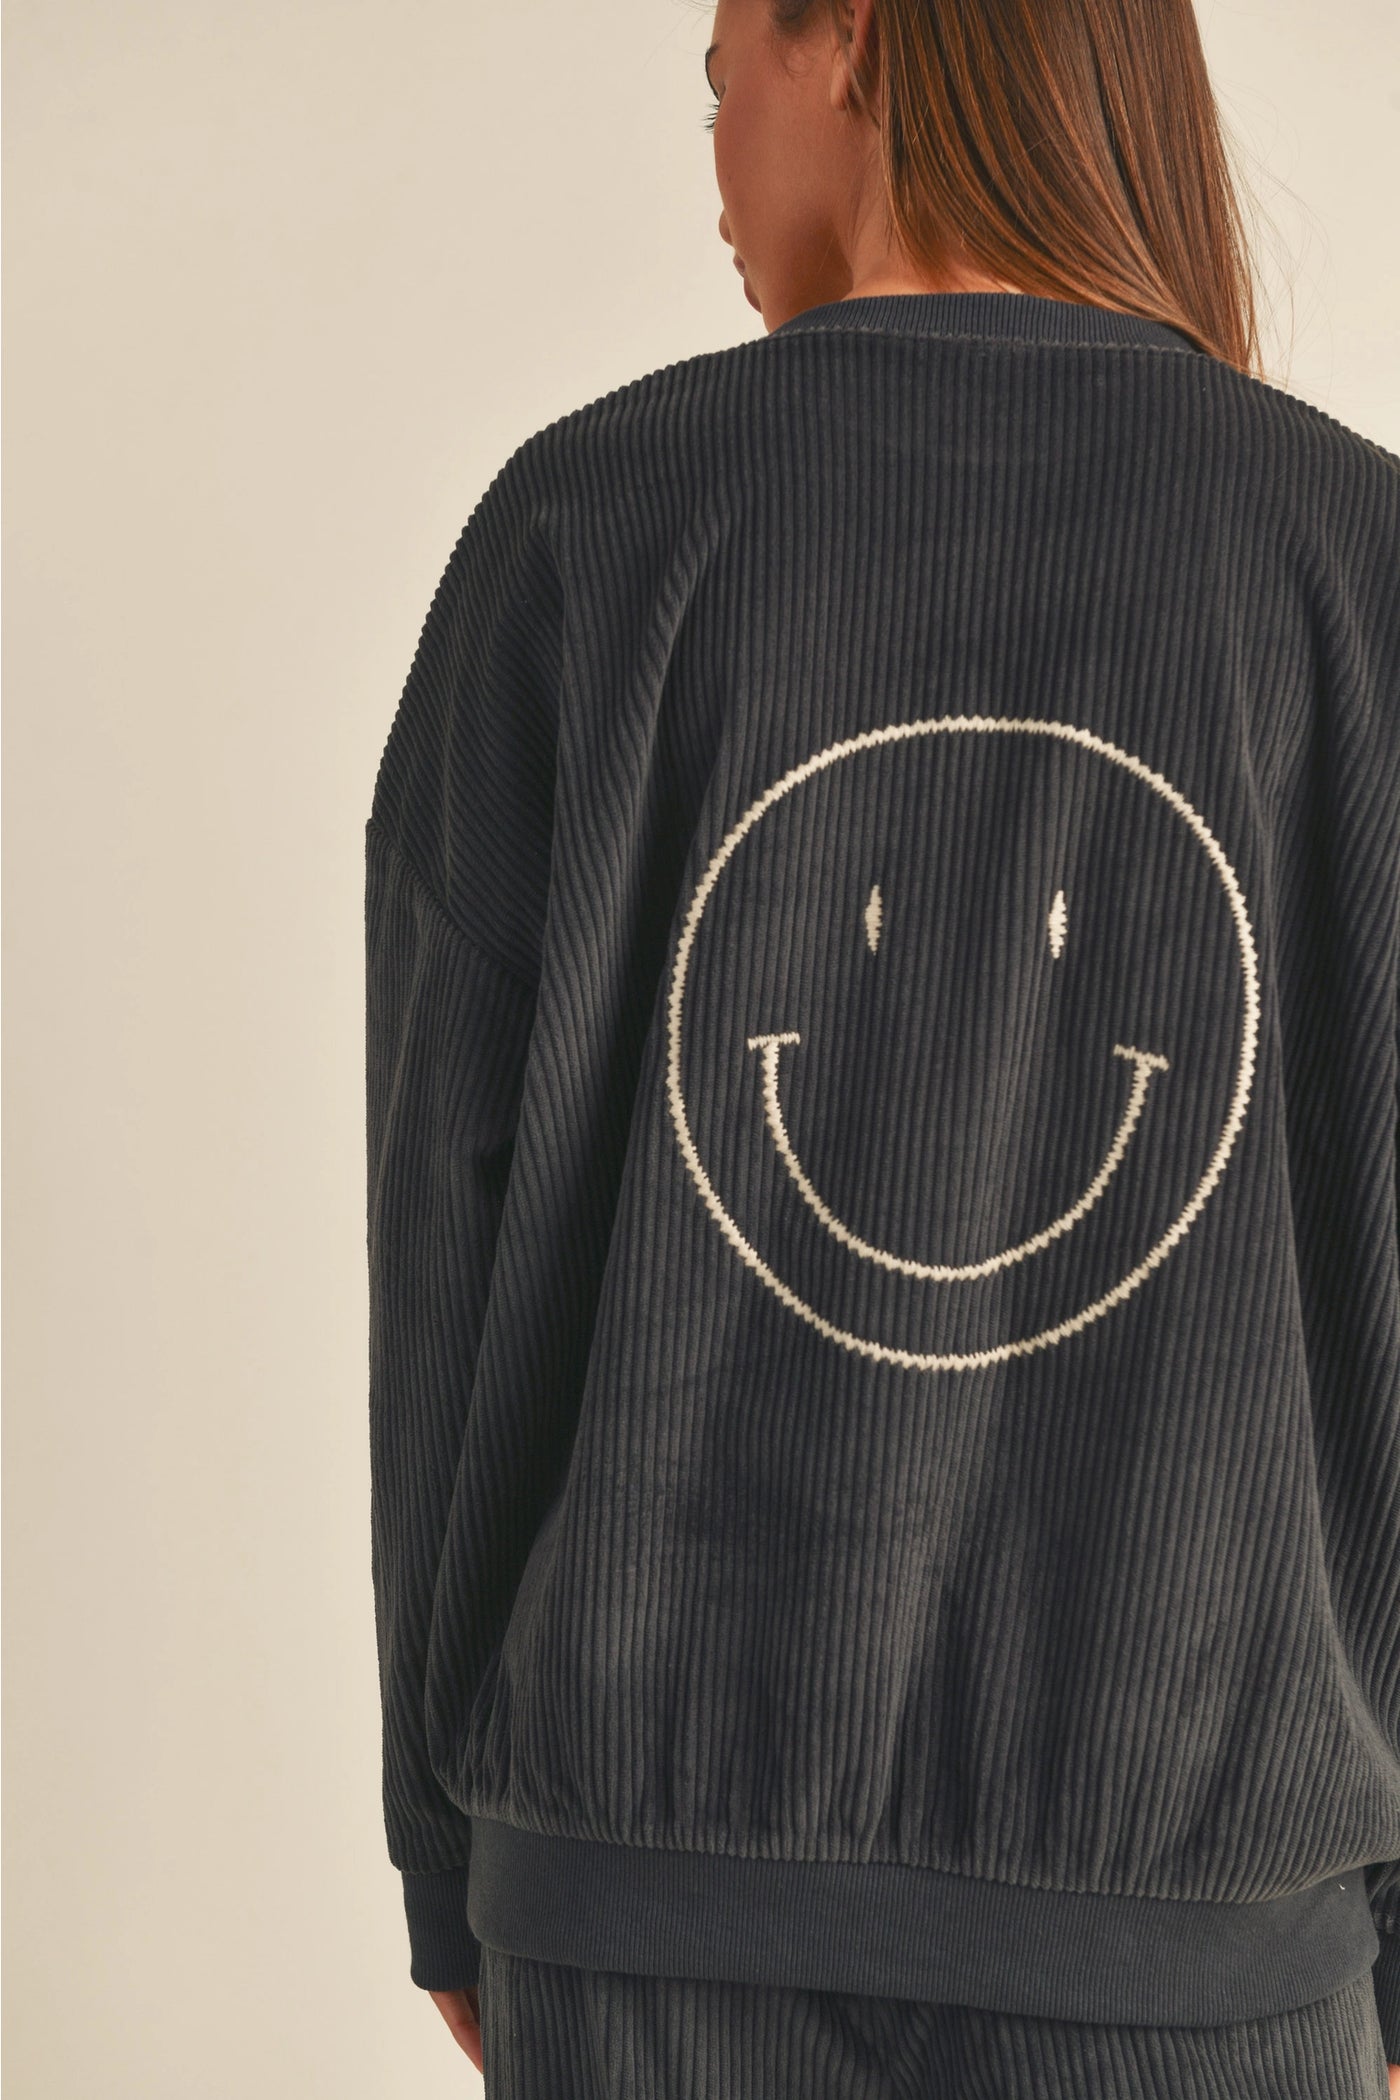 Something To Smile About Sweatshirt, Charcoal